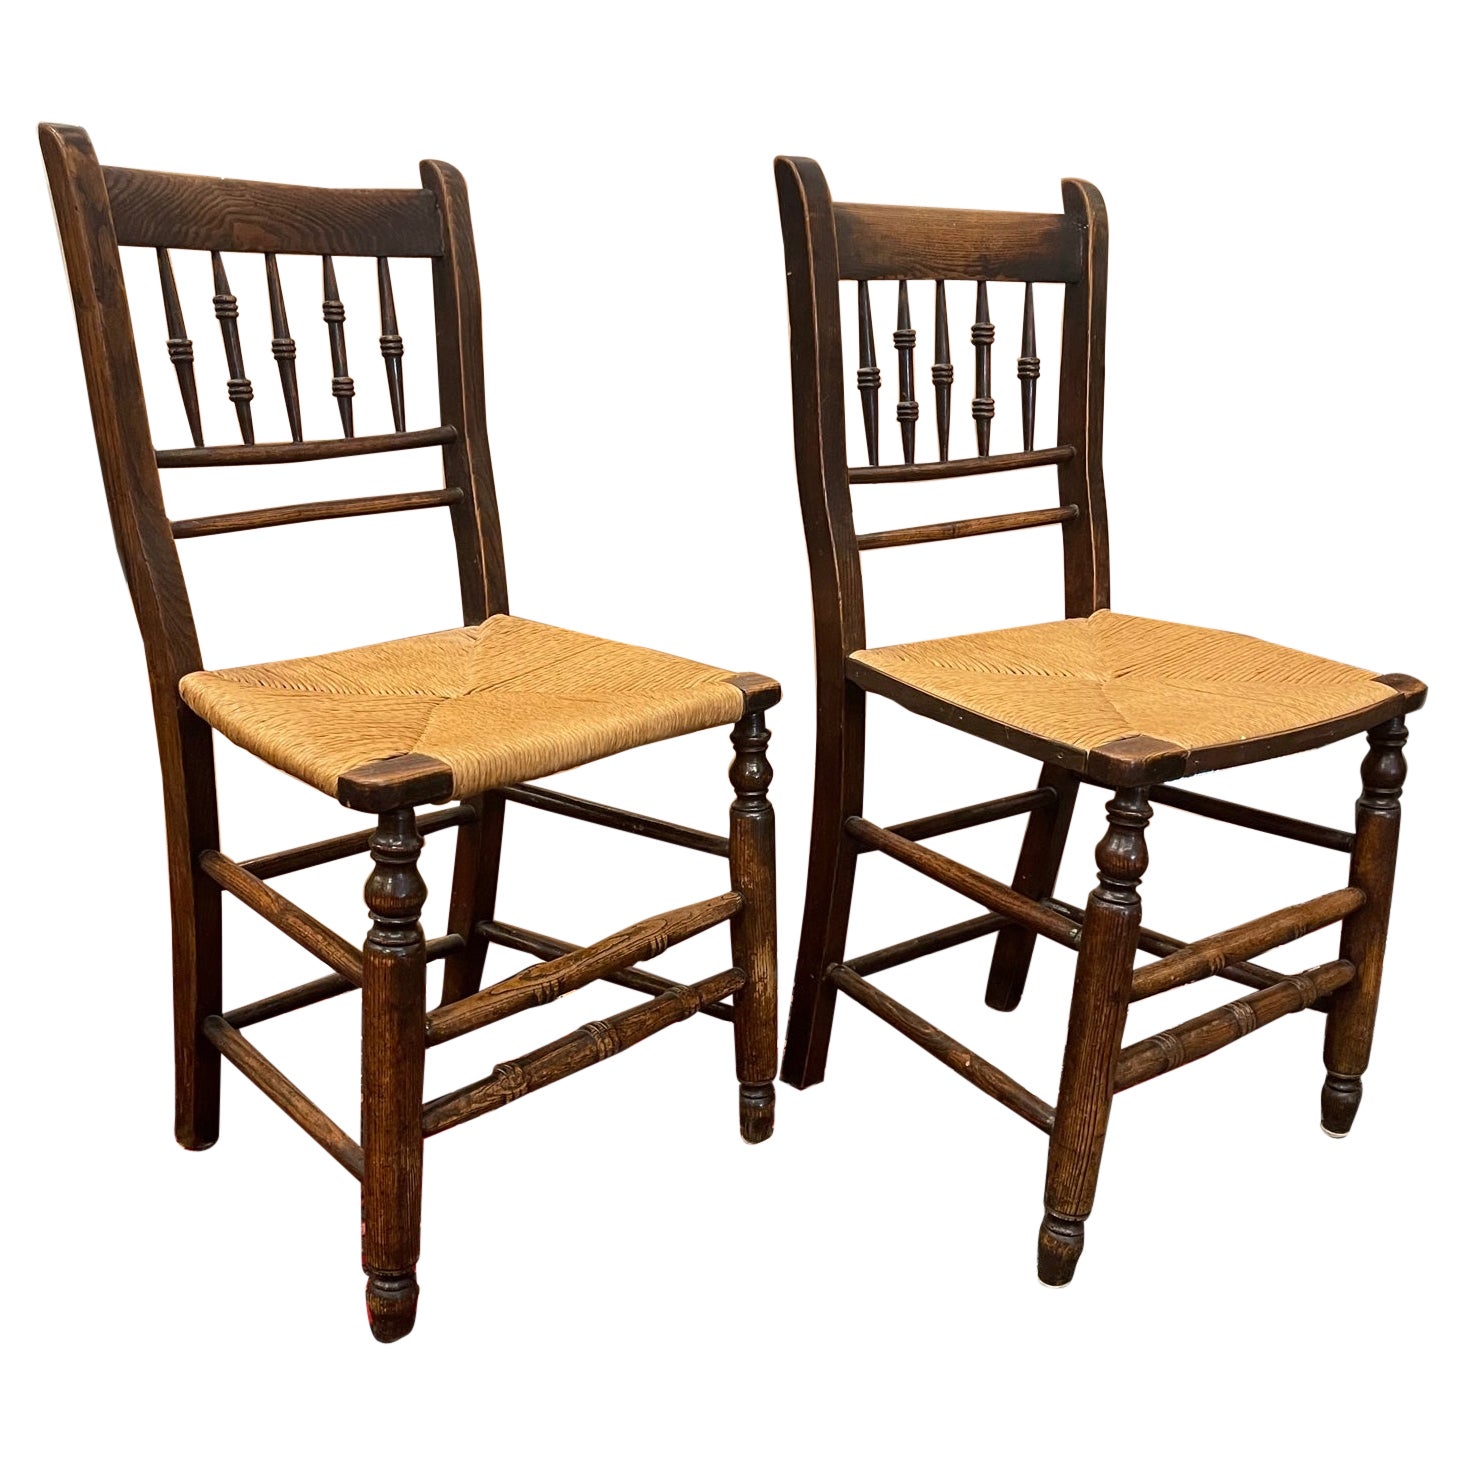 Pair of English Spindleback Side Chairs with Rush Seats, Early 19th Century